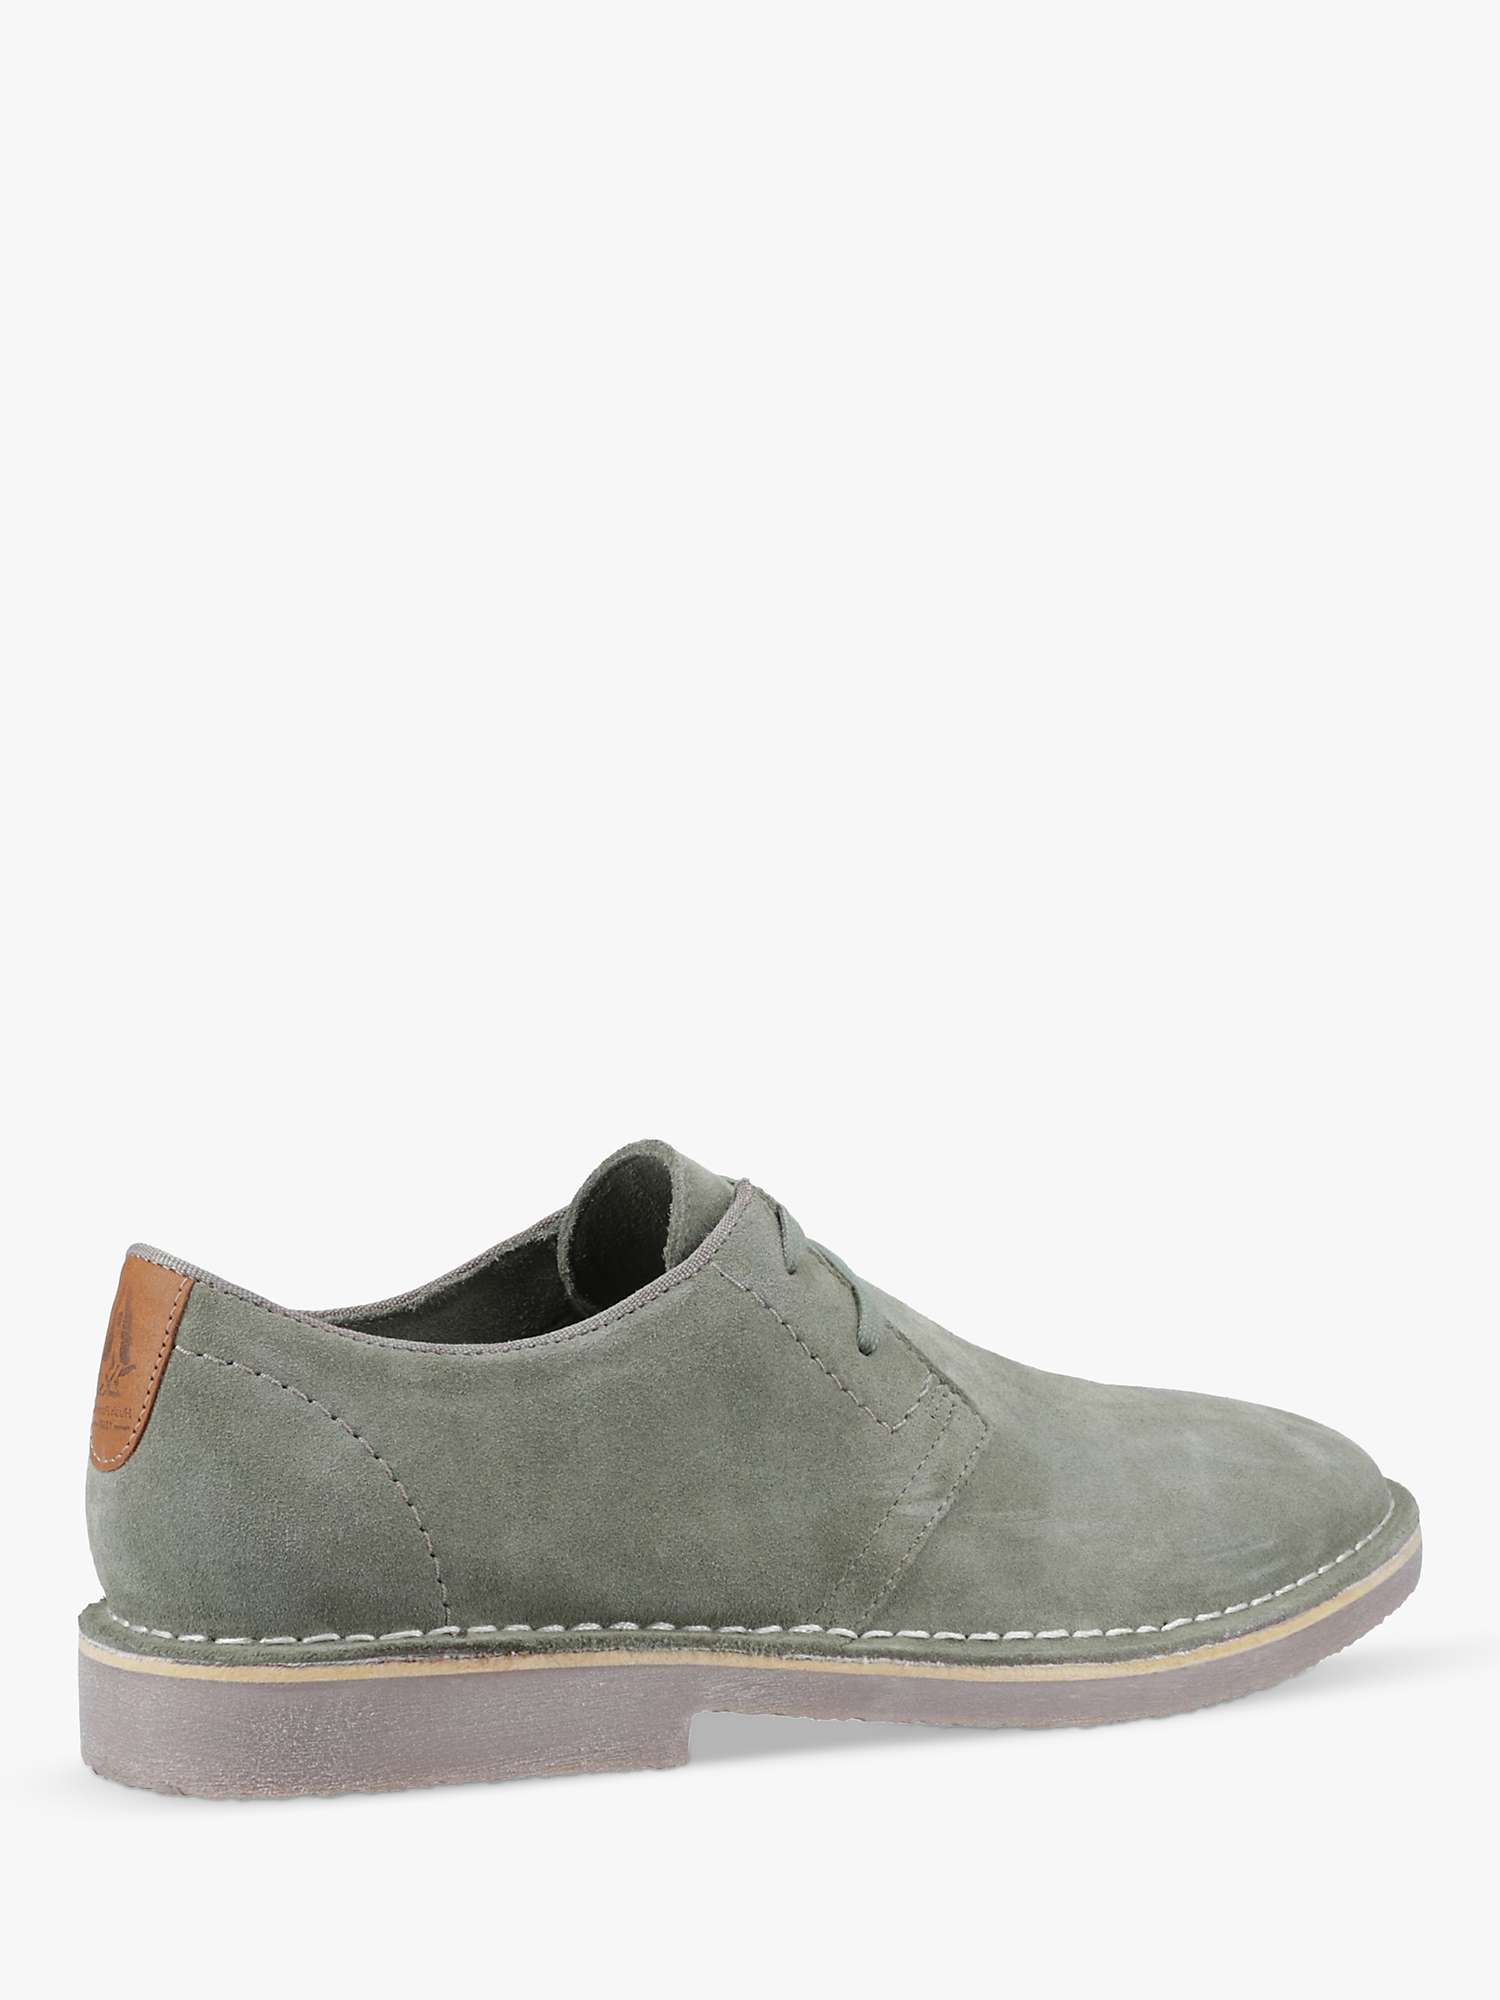 Buy Hush Puppies Classic Scout Lace Up Shoes, Light Green Online at johnlewis.com